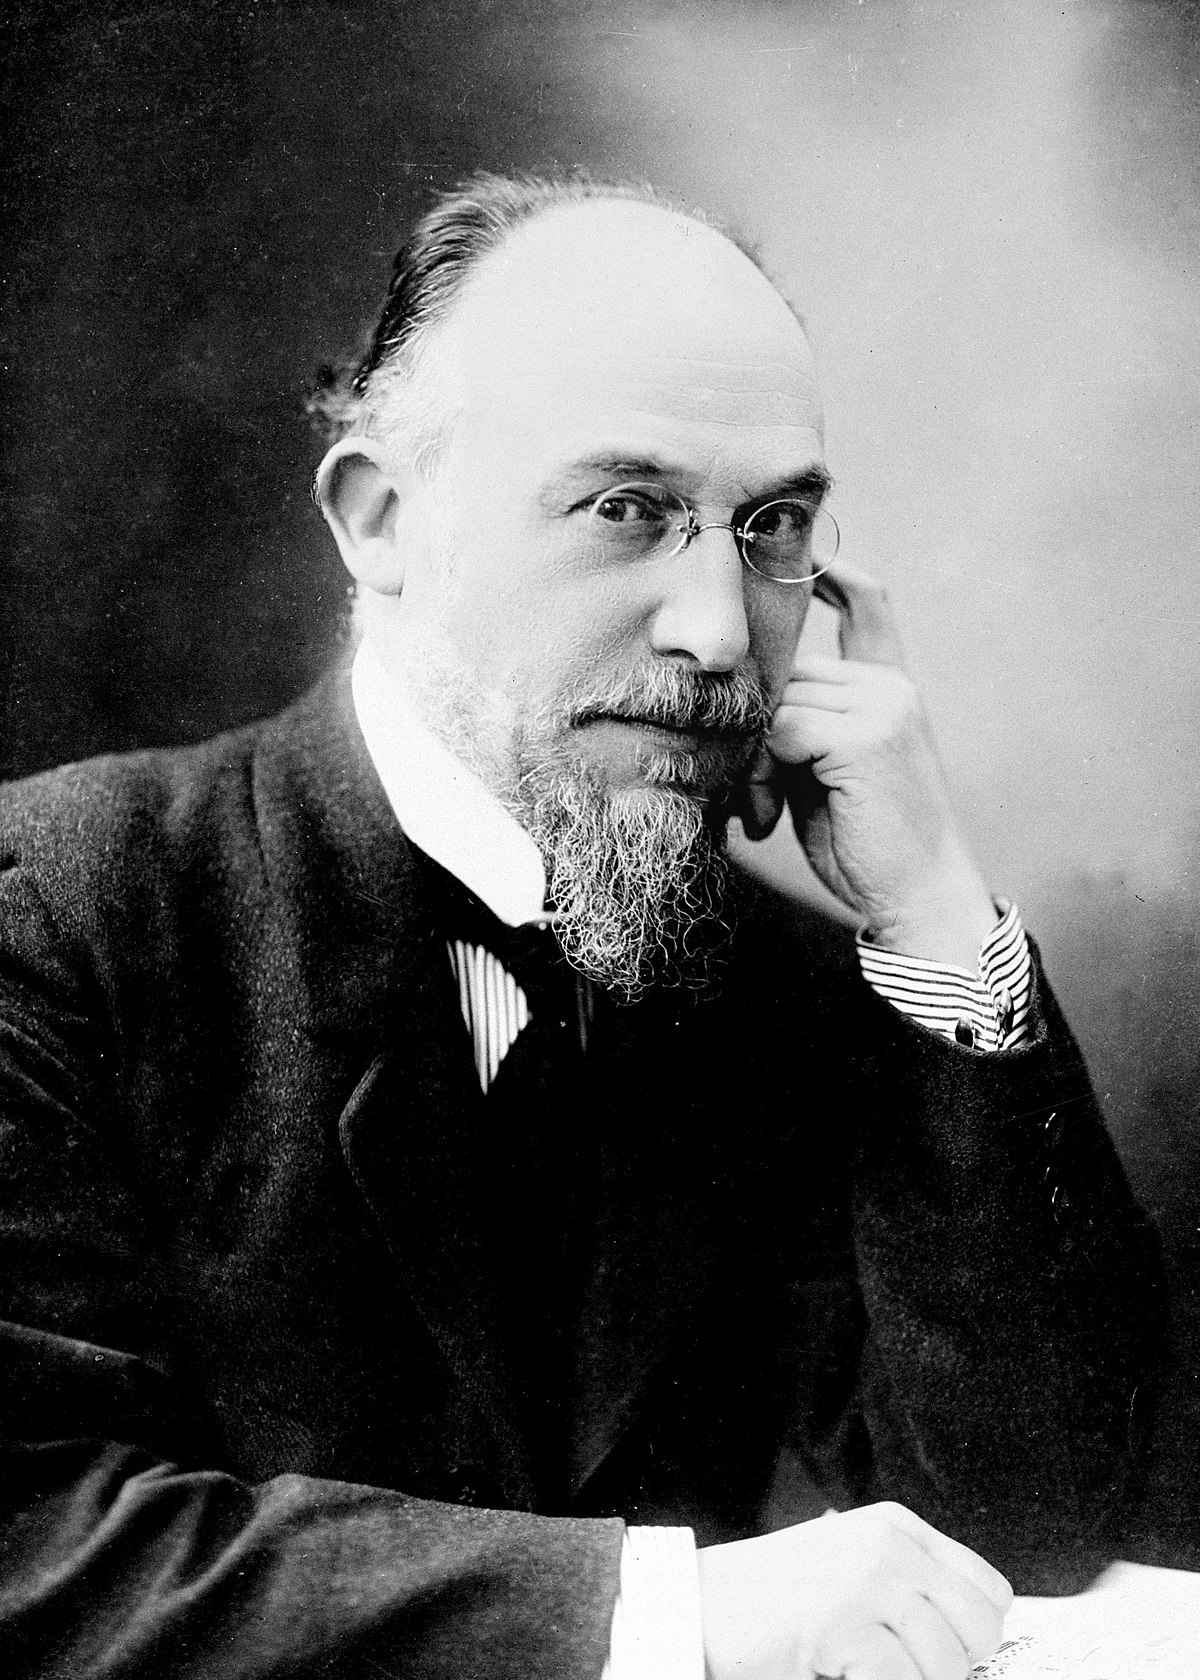 Erik Satie with glasses looking stern and fanciful.